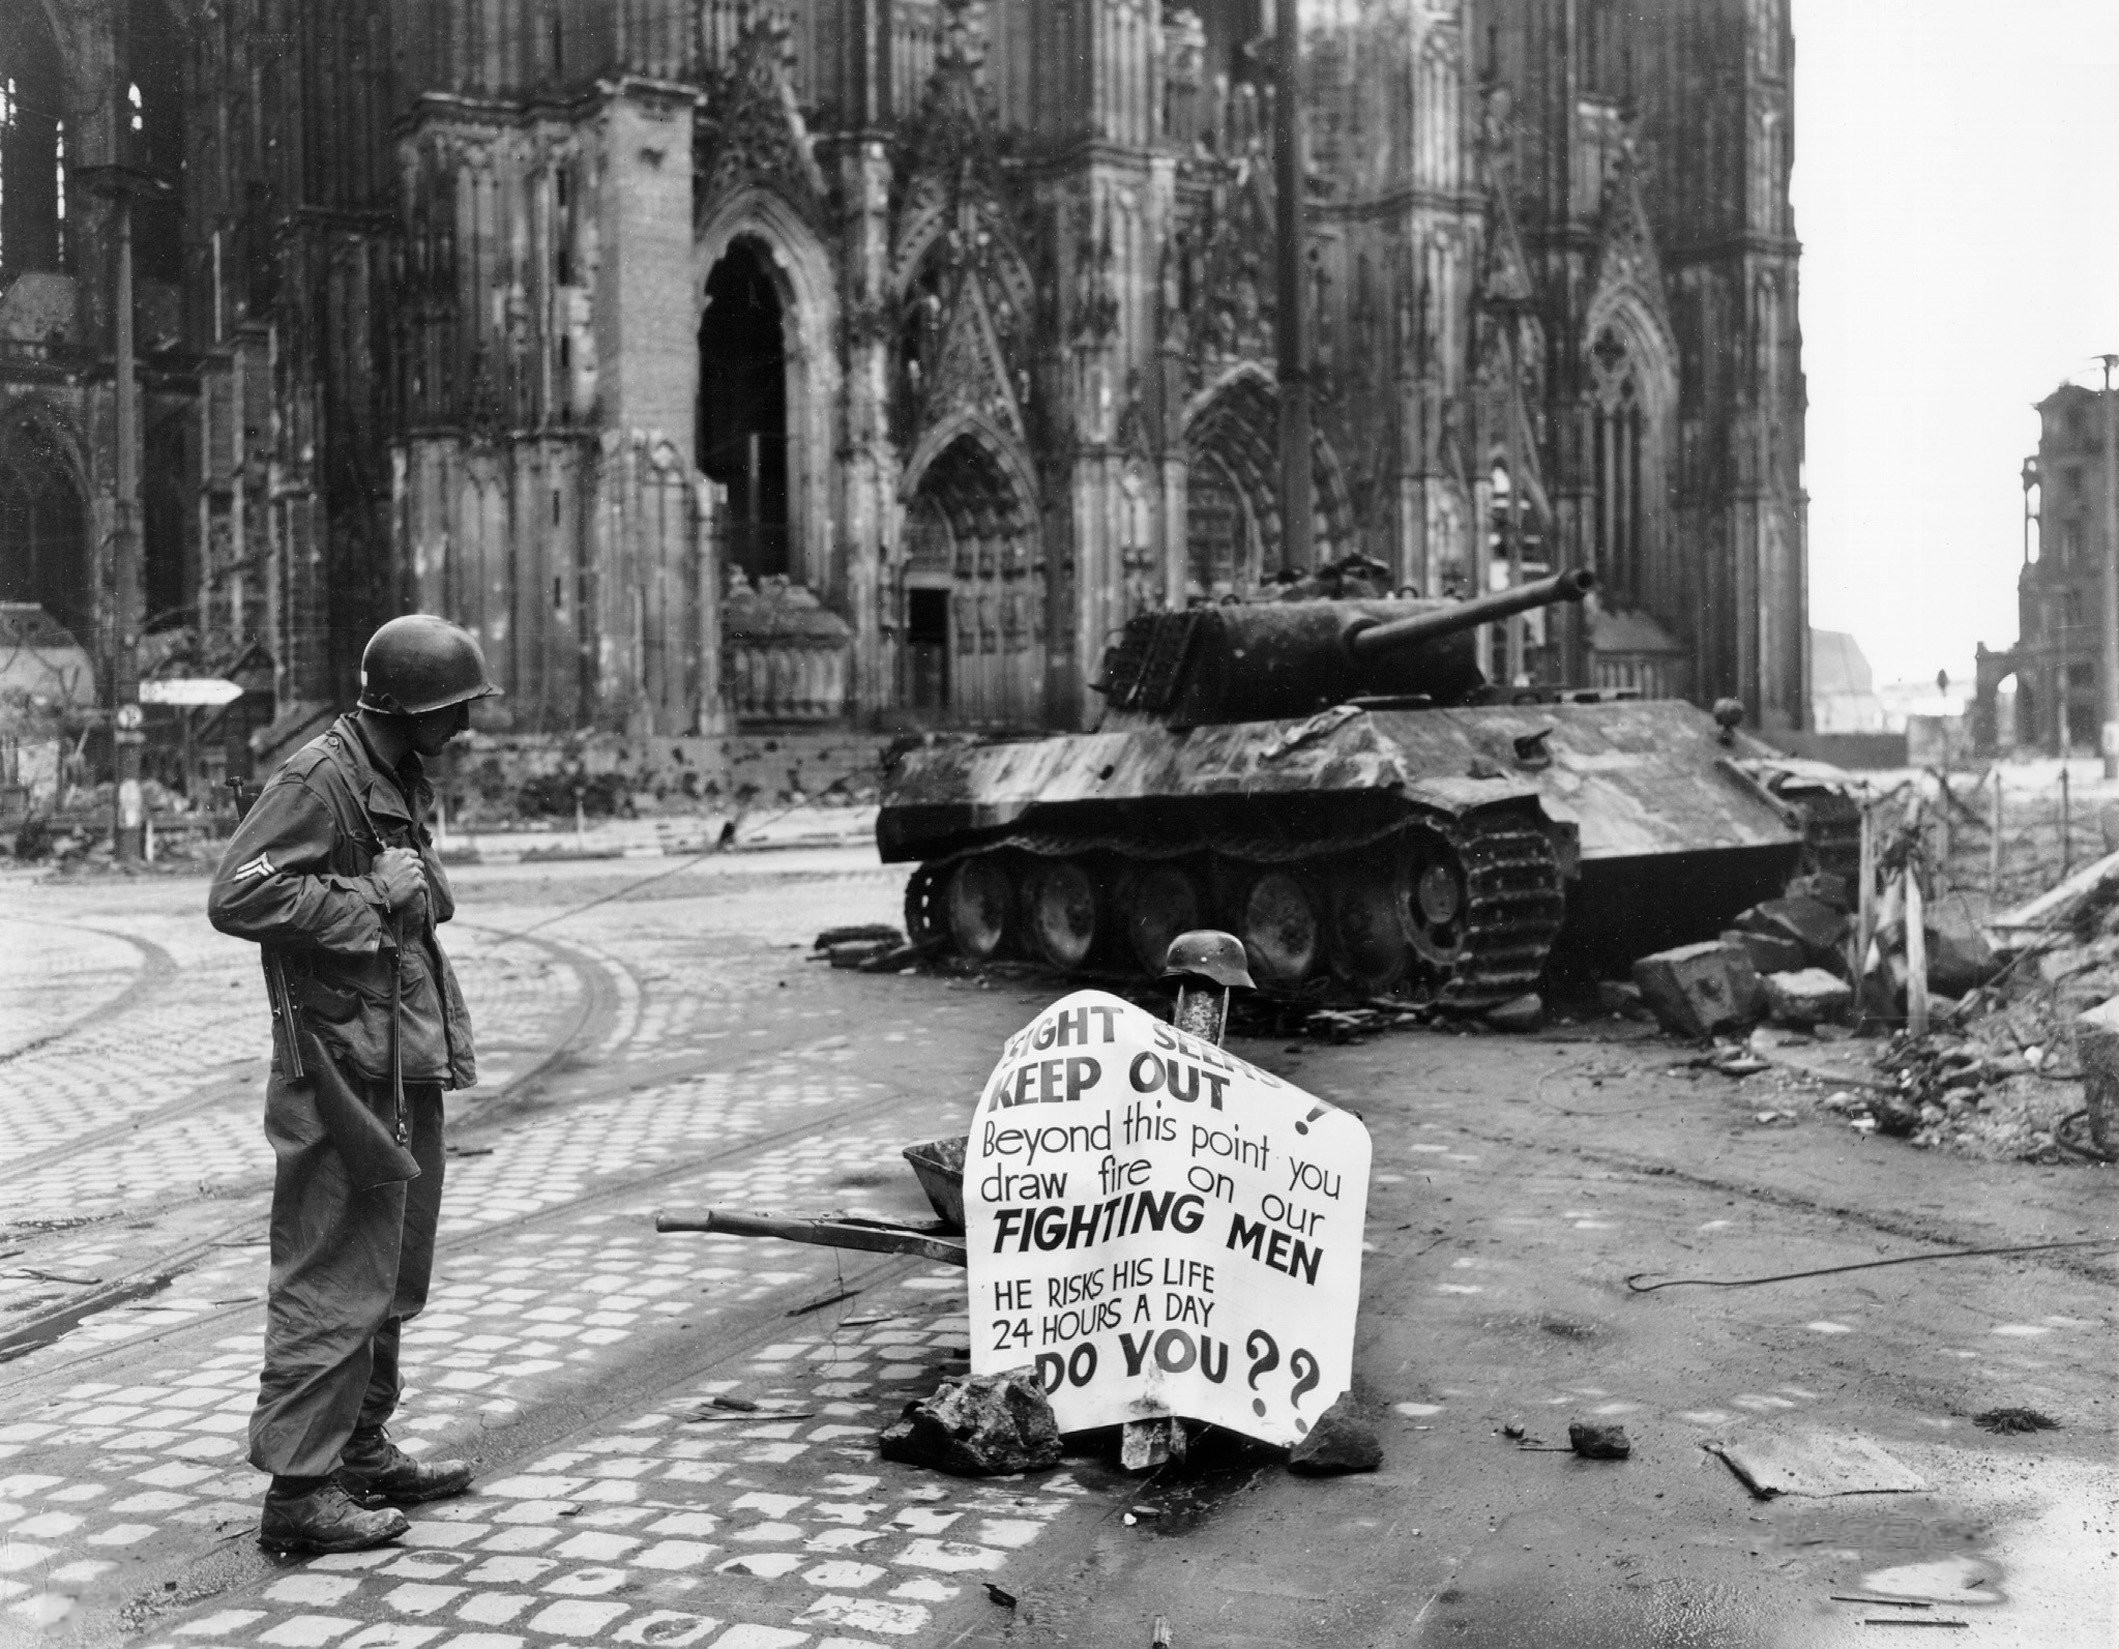 ruins, cityscapes, streets, soldier, architecture, buildings, tanks, World War II, monochrome, historic, cathedrals, Colonization, Cologne, Vienna, old photography, Panther tank - desktop wallpaper